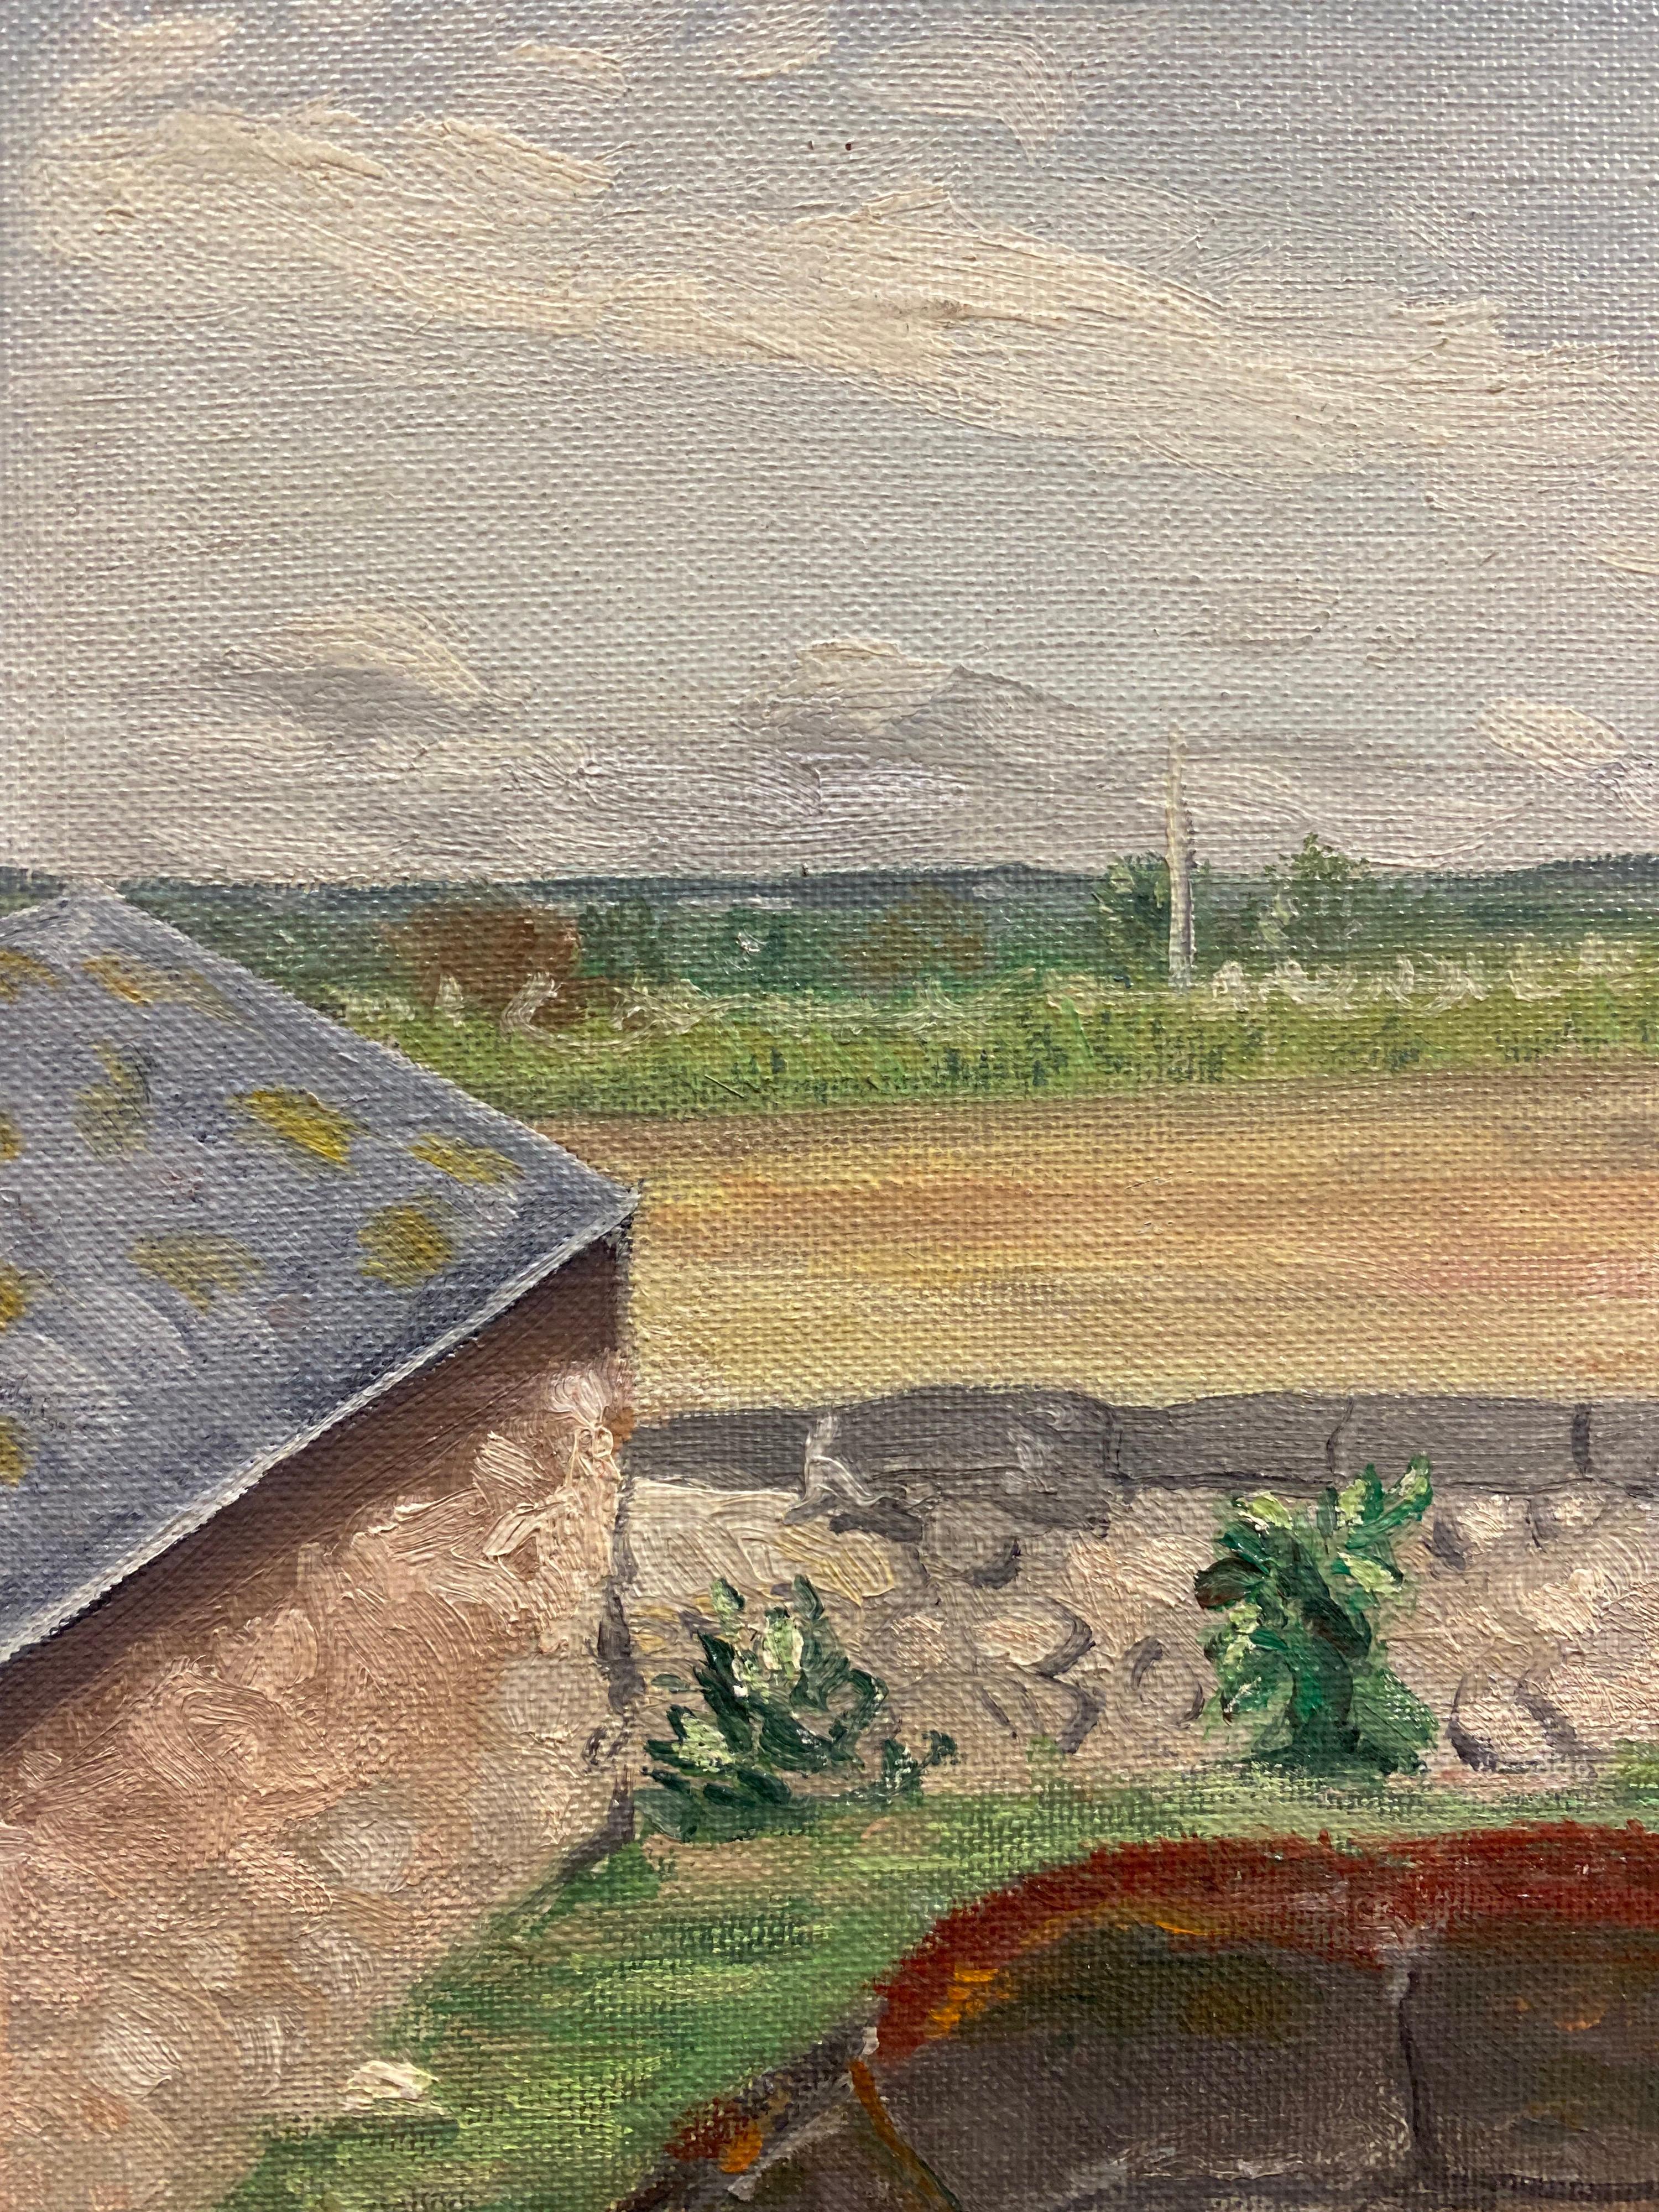 "Landscape"
by Geneviève Zondervan (French 1922-2013)
oil painting on board

board: 10.5 x 7.5 inches

Superb mid-century oil painting on board by the French artist, Geneviève Zondervan (French 1922-2013). The painting has excellent provenance,